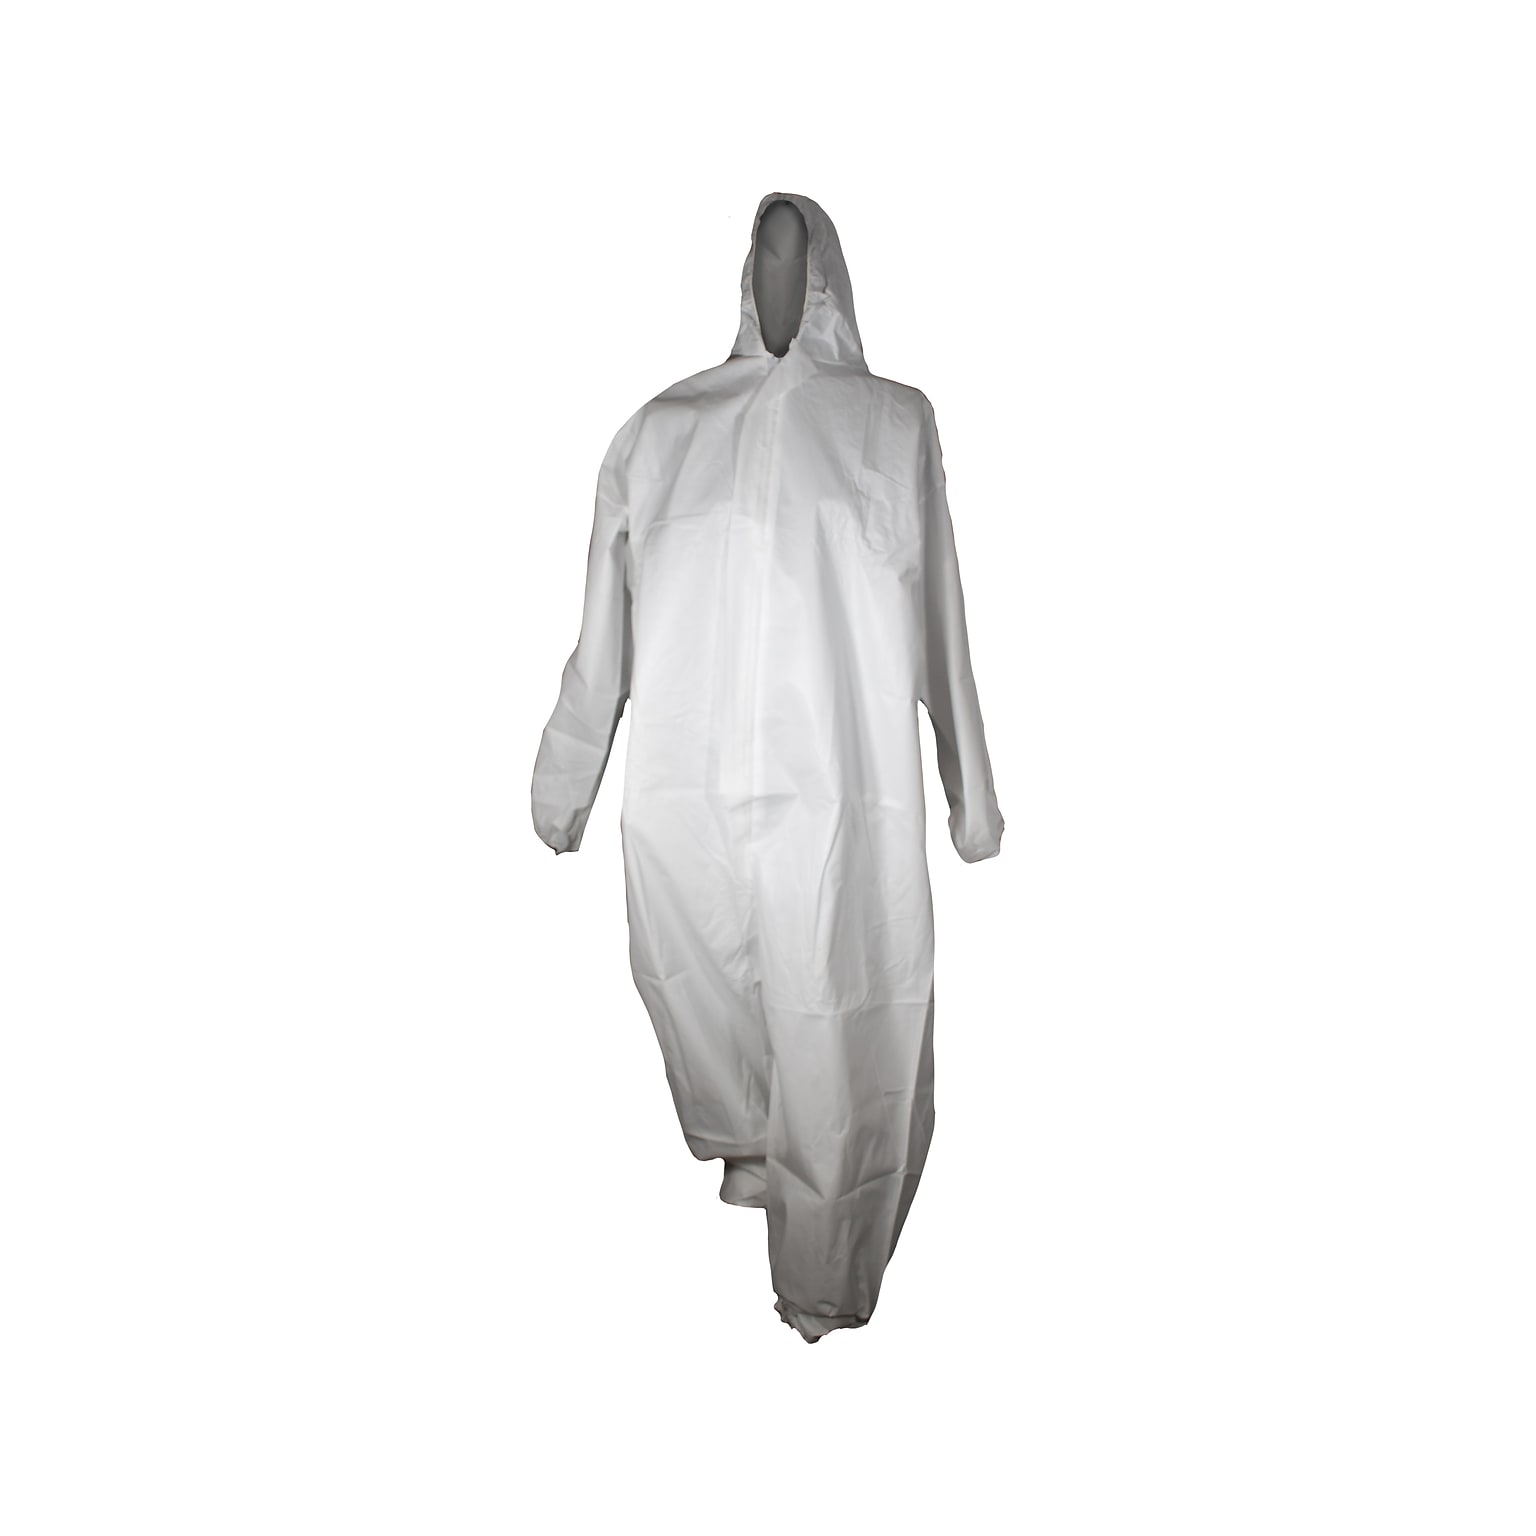 Unimed 3X-Large Coverall with Hood, White, 25/Carton (WMCH1027003X)